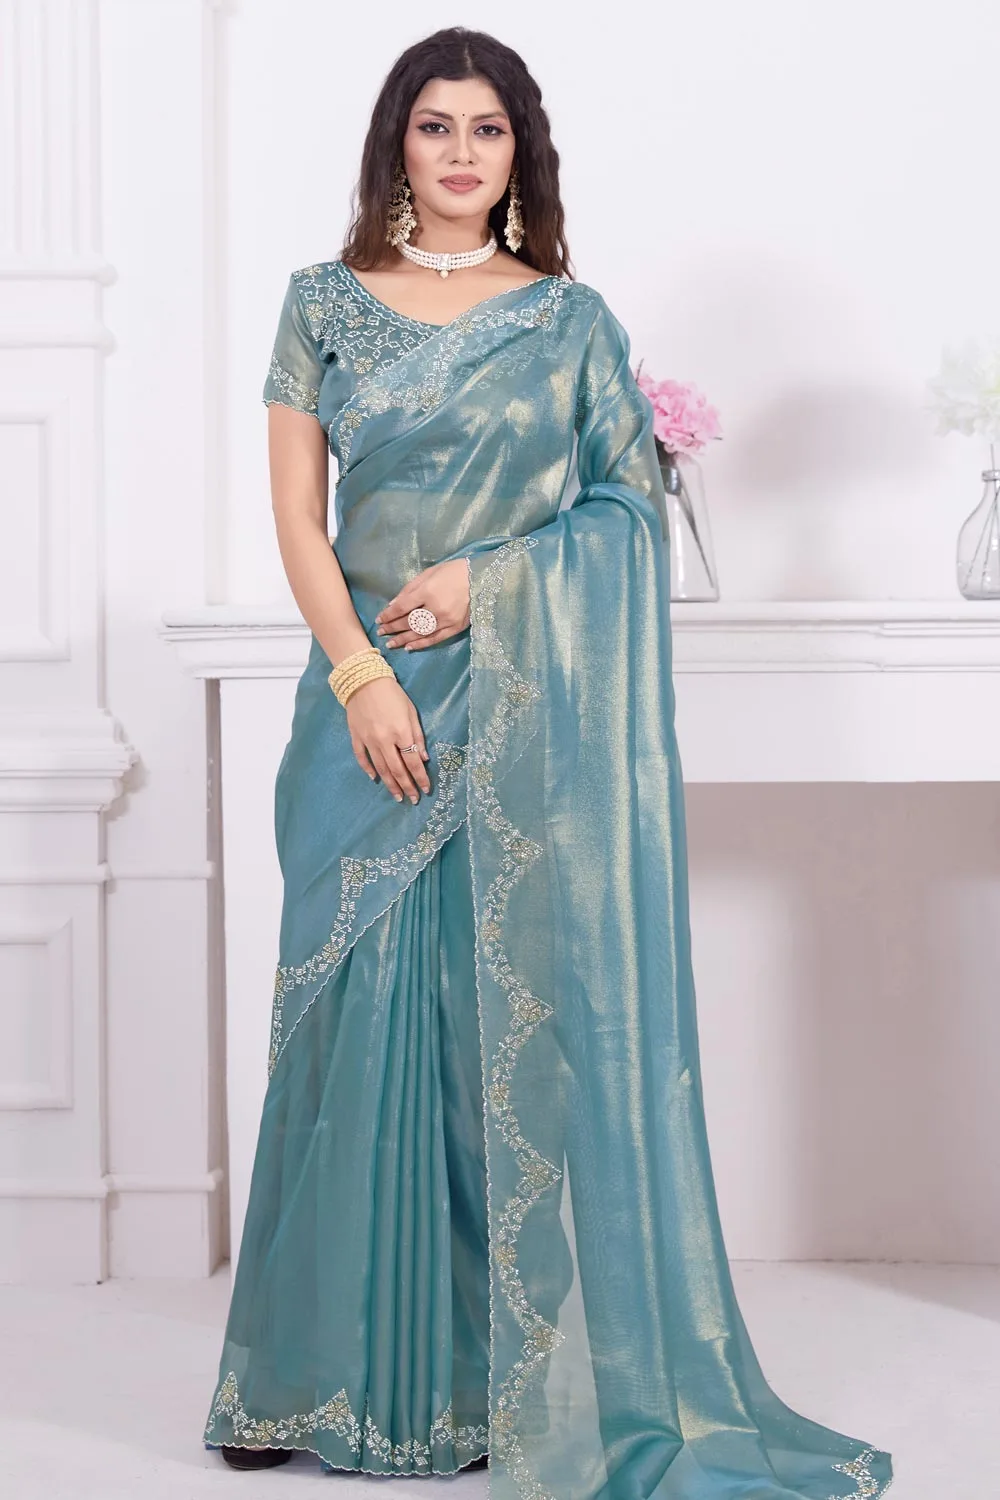 Fancy Teal Saree with Raina Net Coating Fabric and Dual-Colored Zircon Border